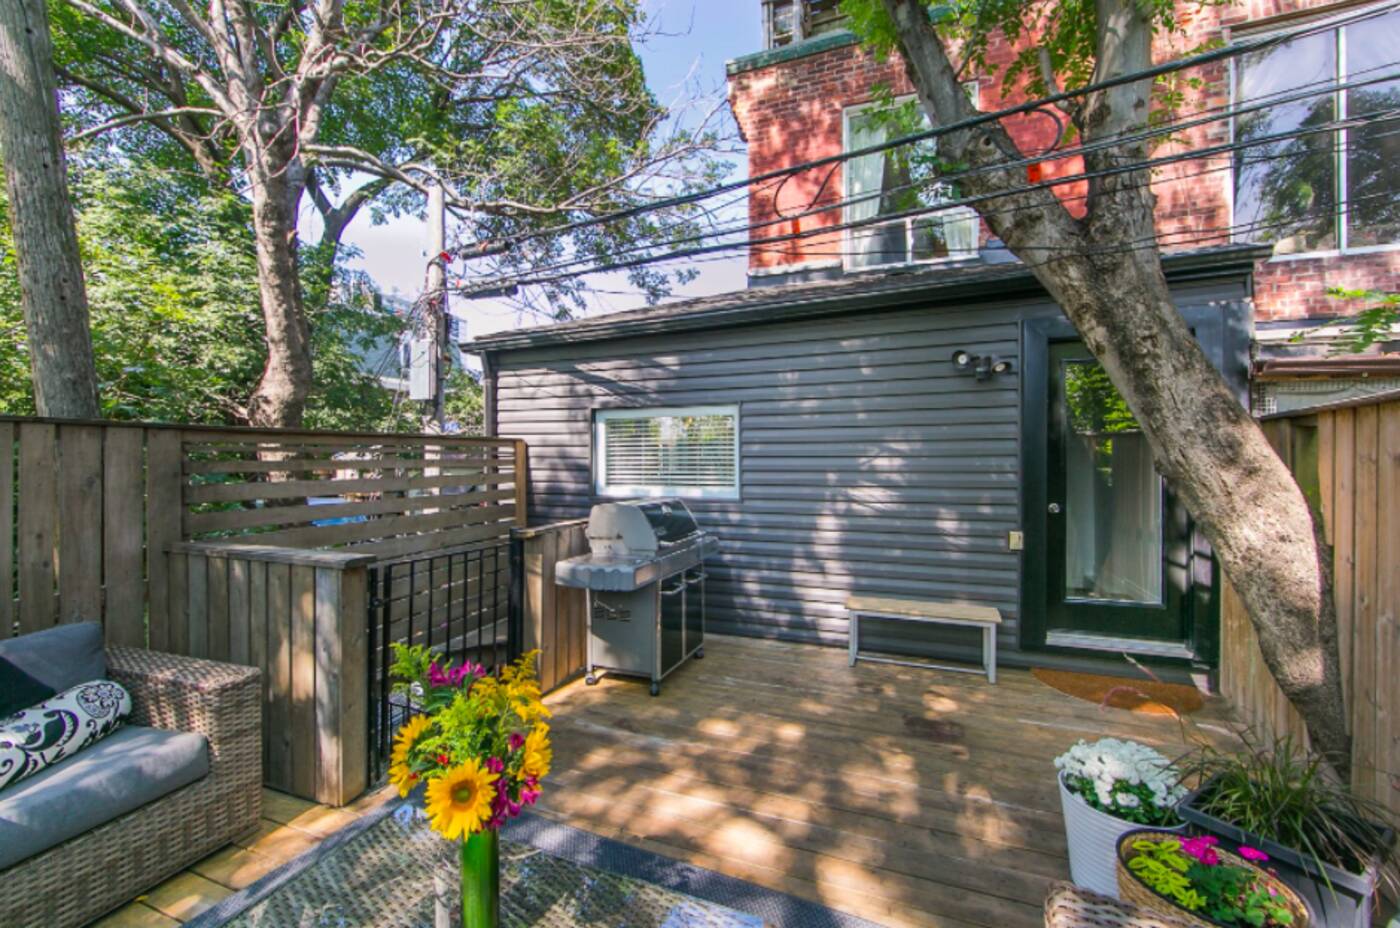 Sold Toronto House Above Train Tracks Goes For 12 Million